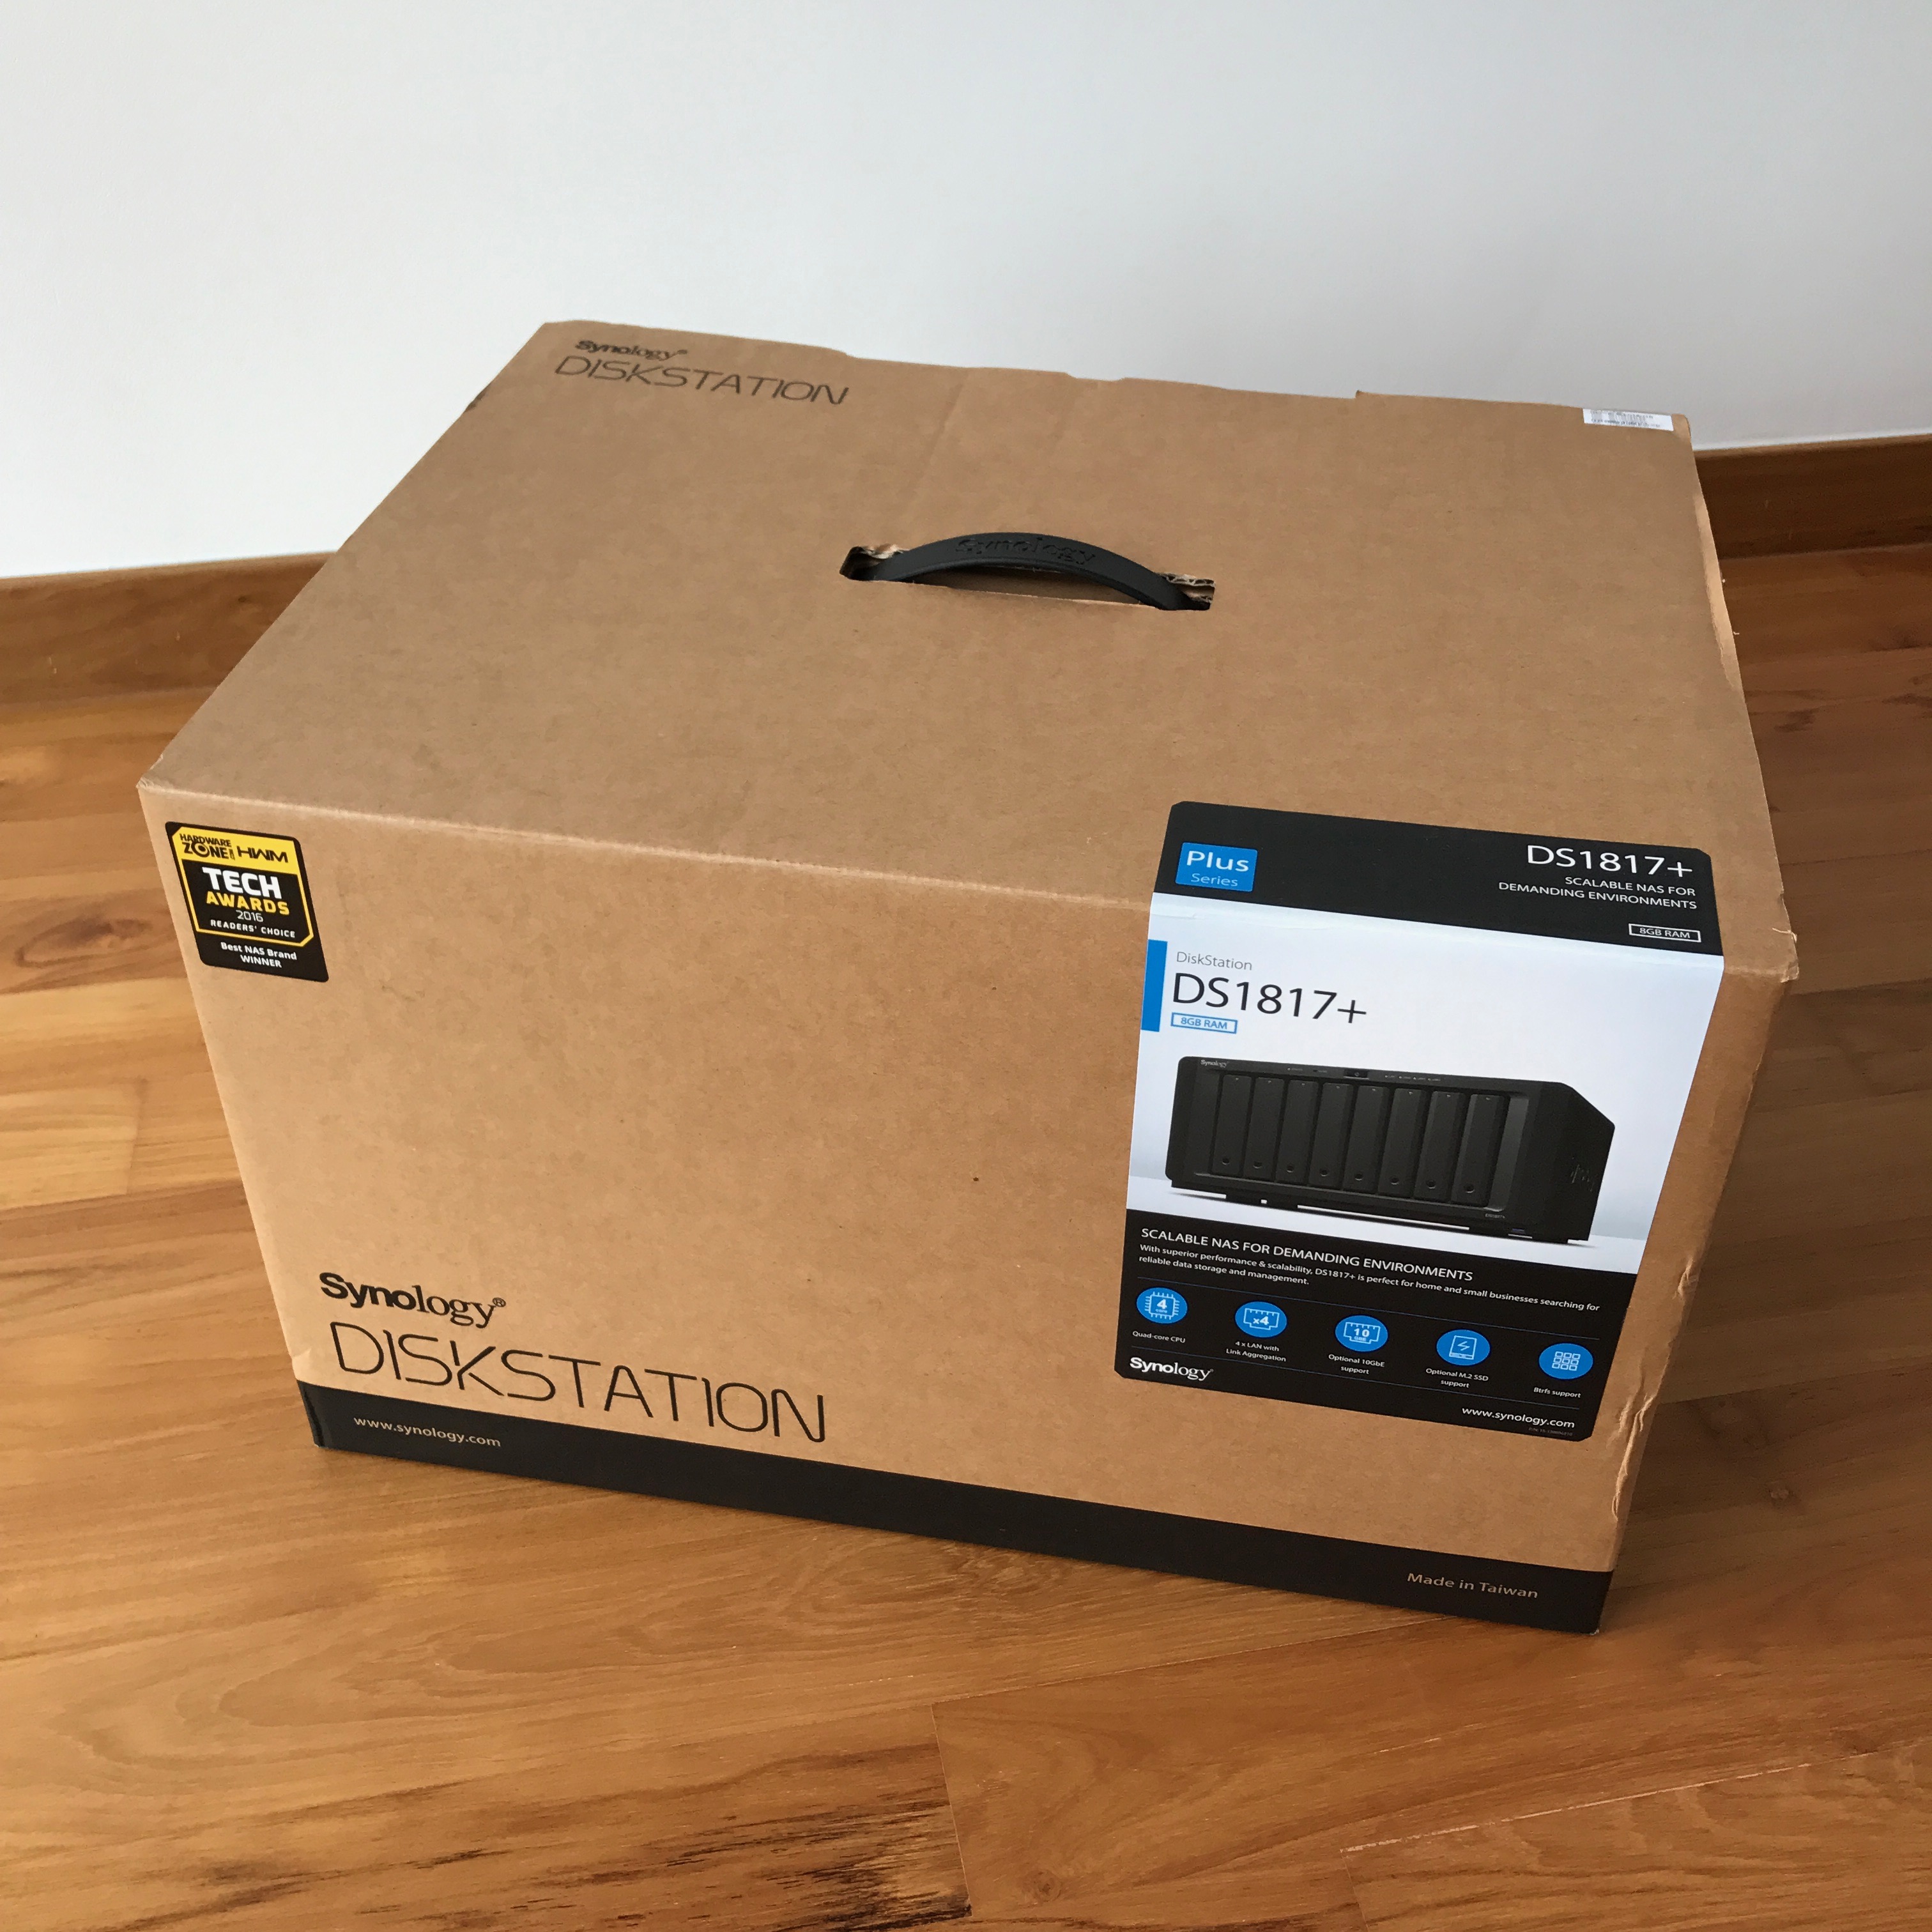 The new Synology DiskStation DS1817+ is one powerful network